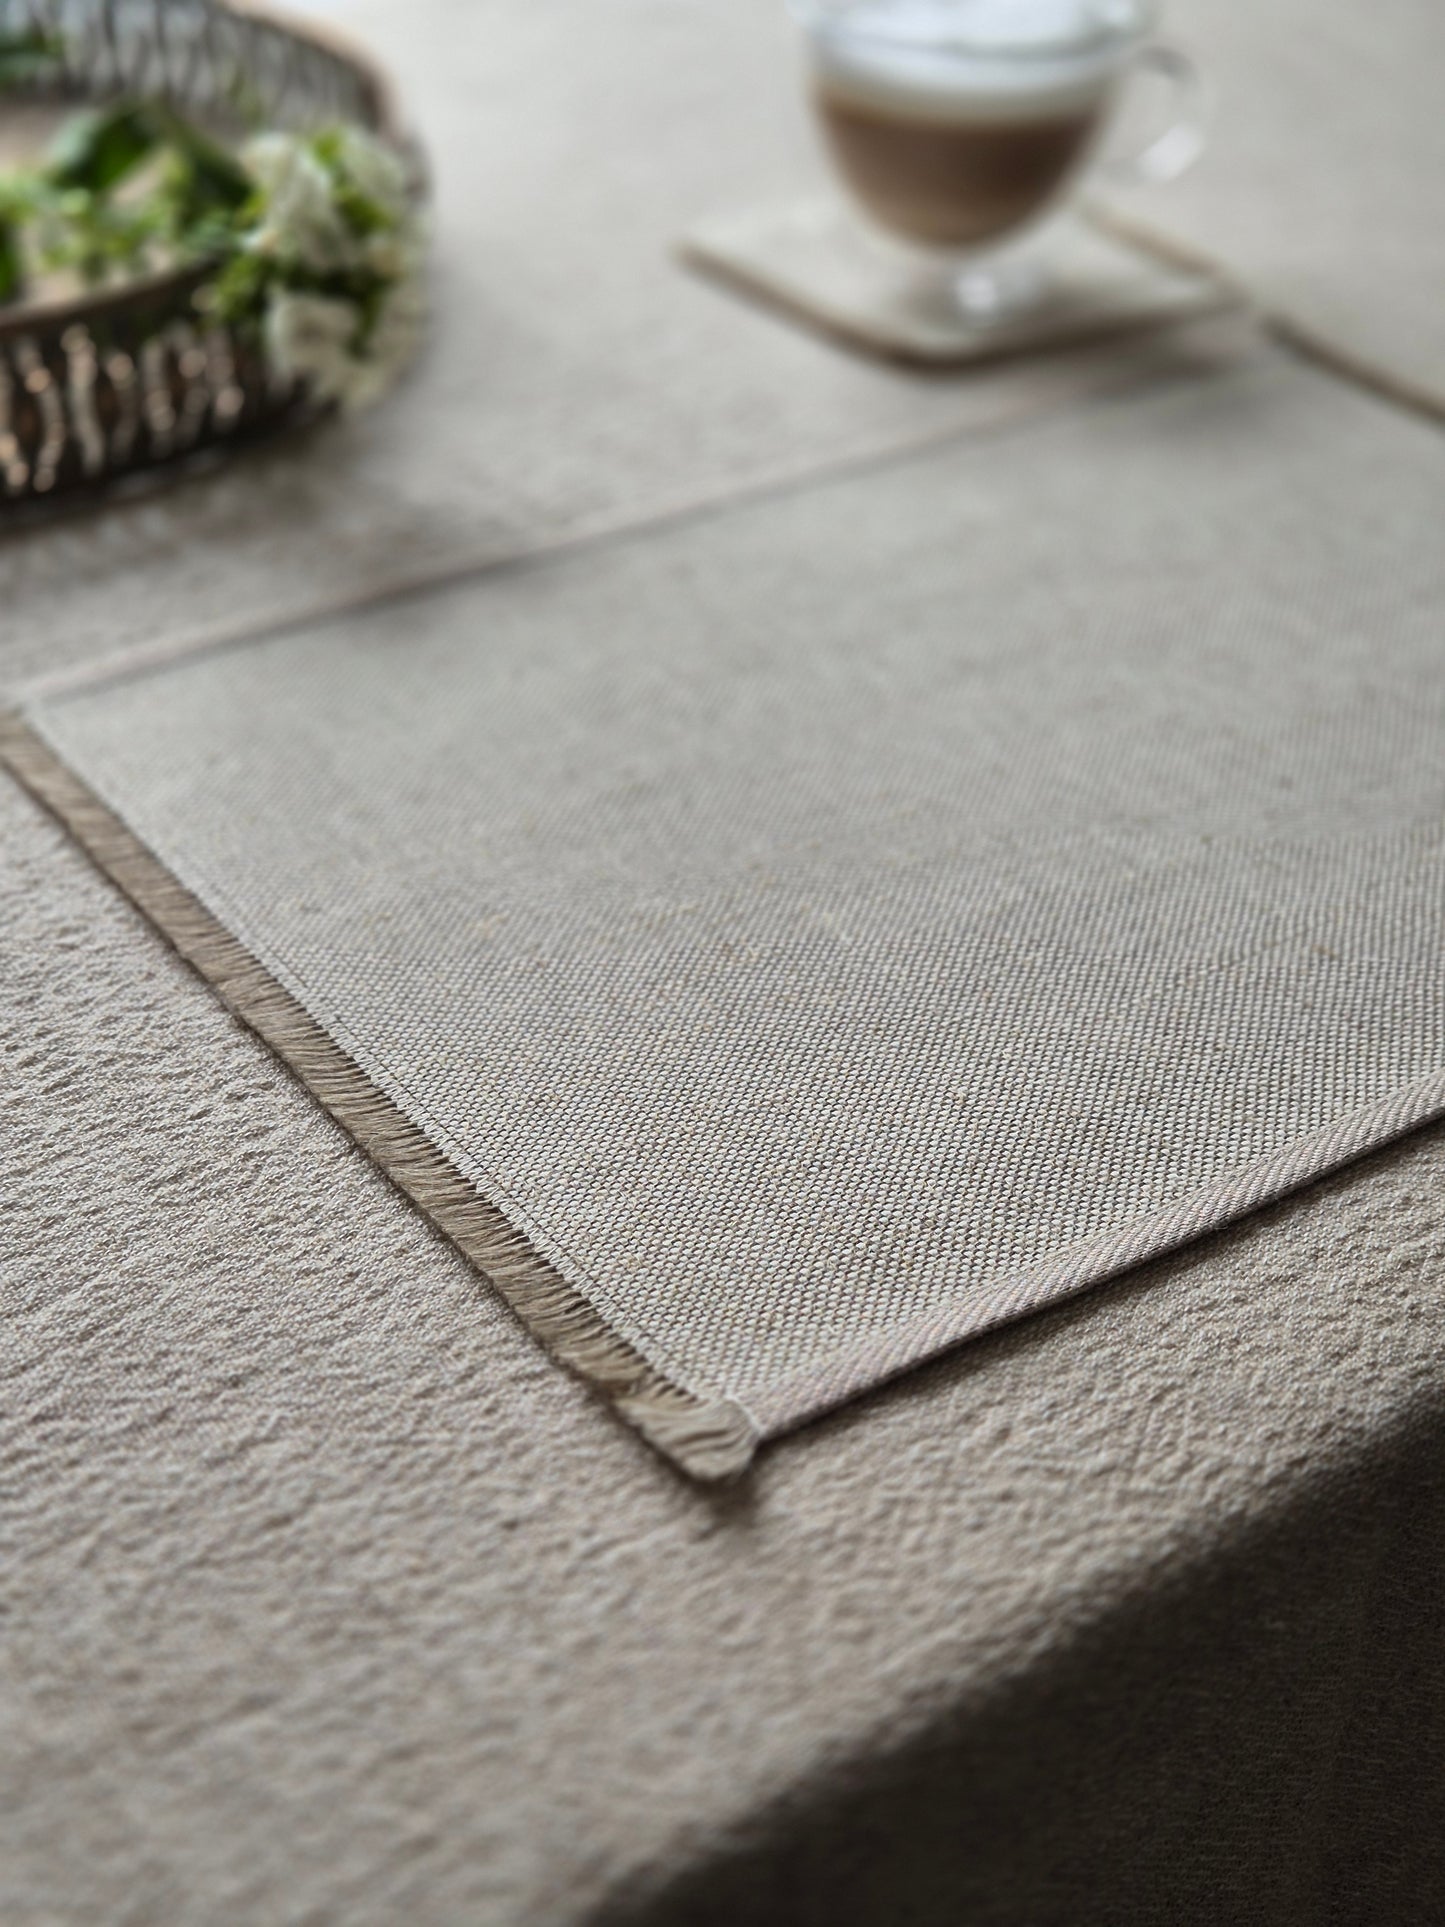 Sara oatmeal pure linen textured placemat with hand brushed edges.